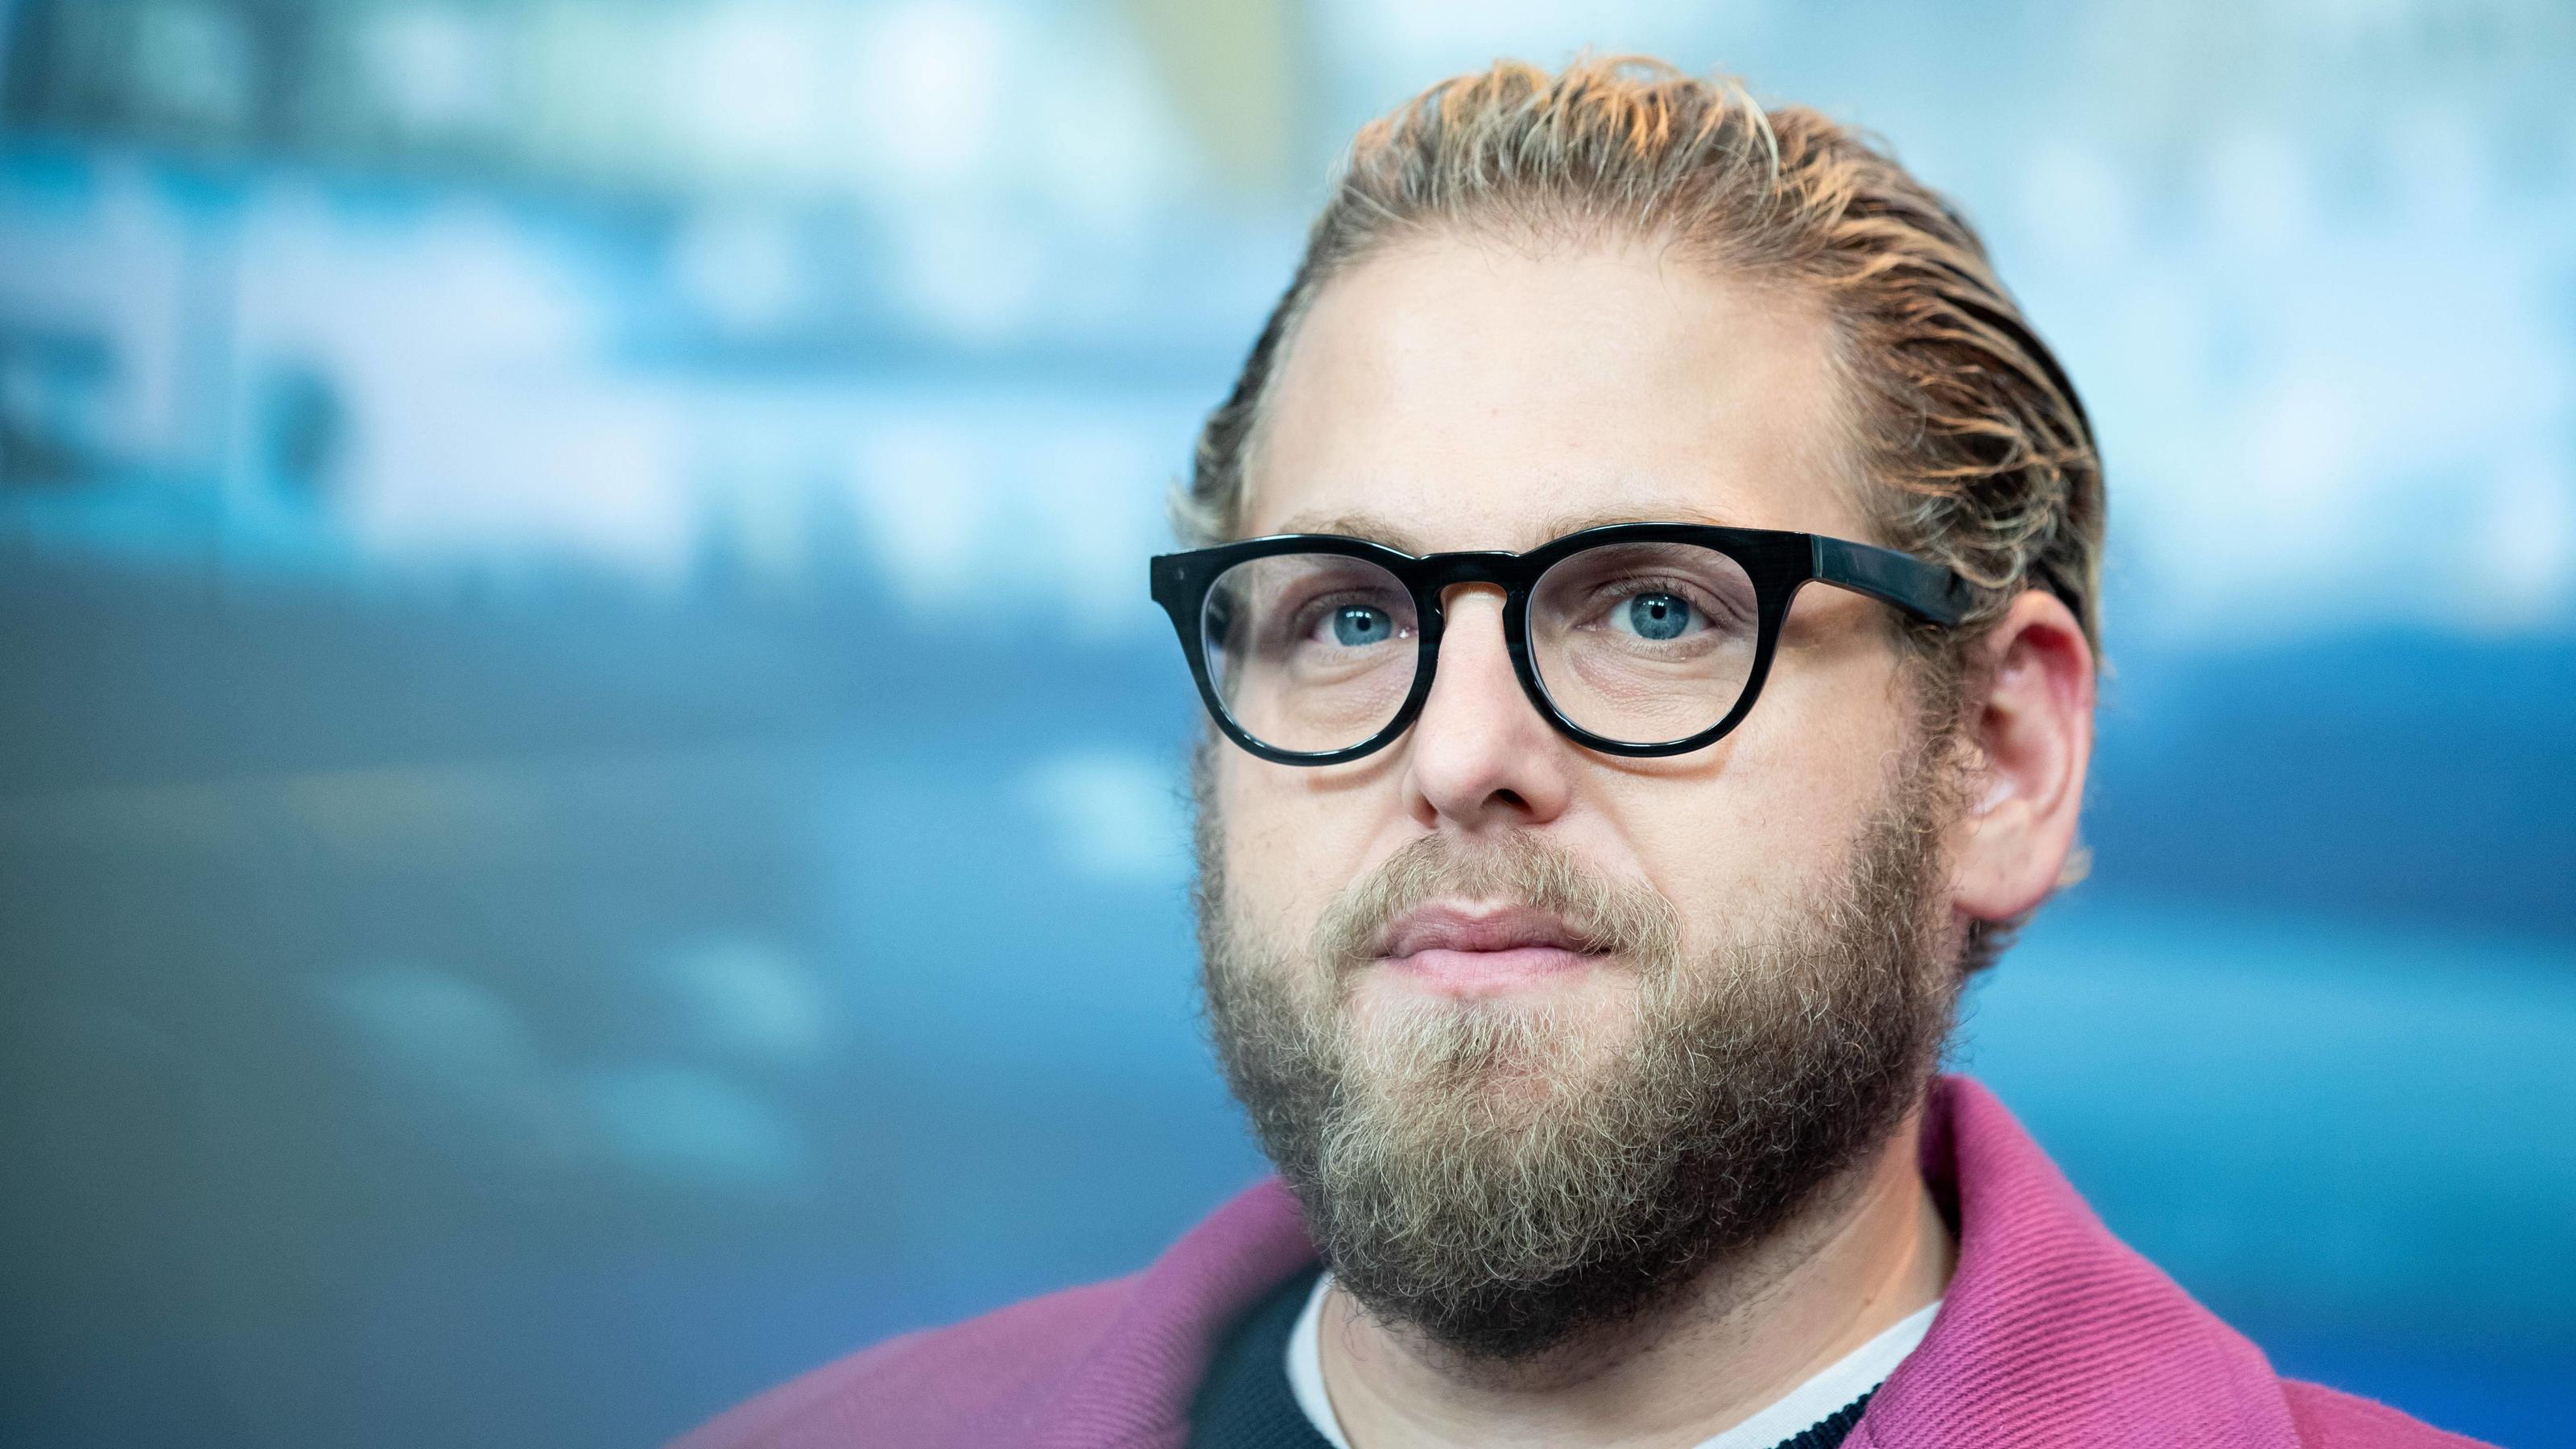  February 10, 2019 - Berlin, Germany - Jonah Hill attends the Mid 90 s Press Conference at the 69th Berlinale International Film Festival Berlin on February 10, 2019, in Berlin, Germany. The Berlin film festival will be running from February 7 to 17,